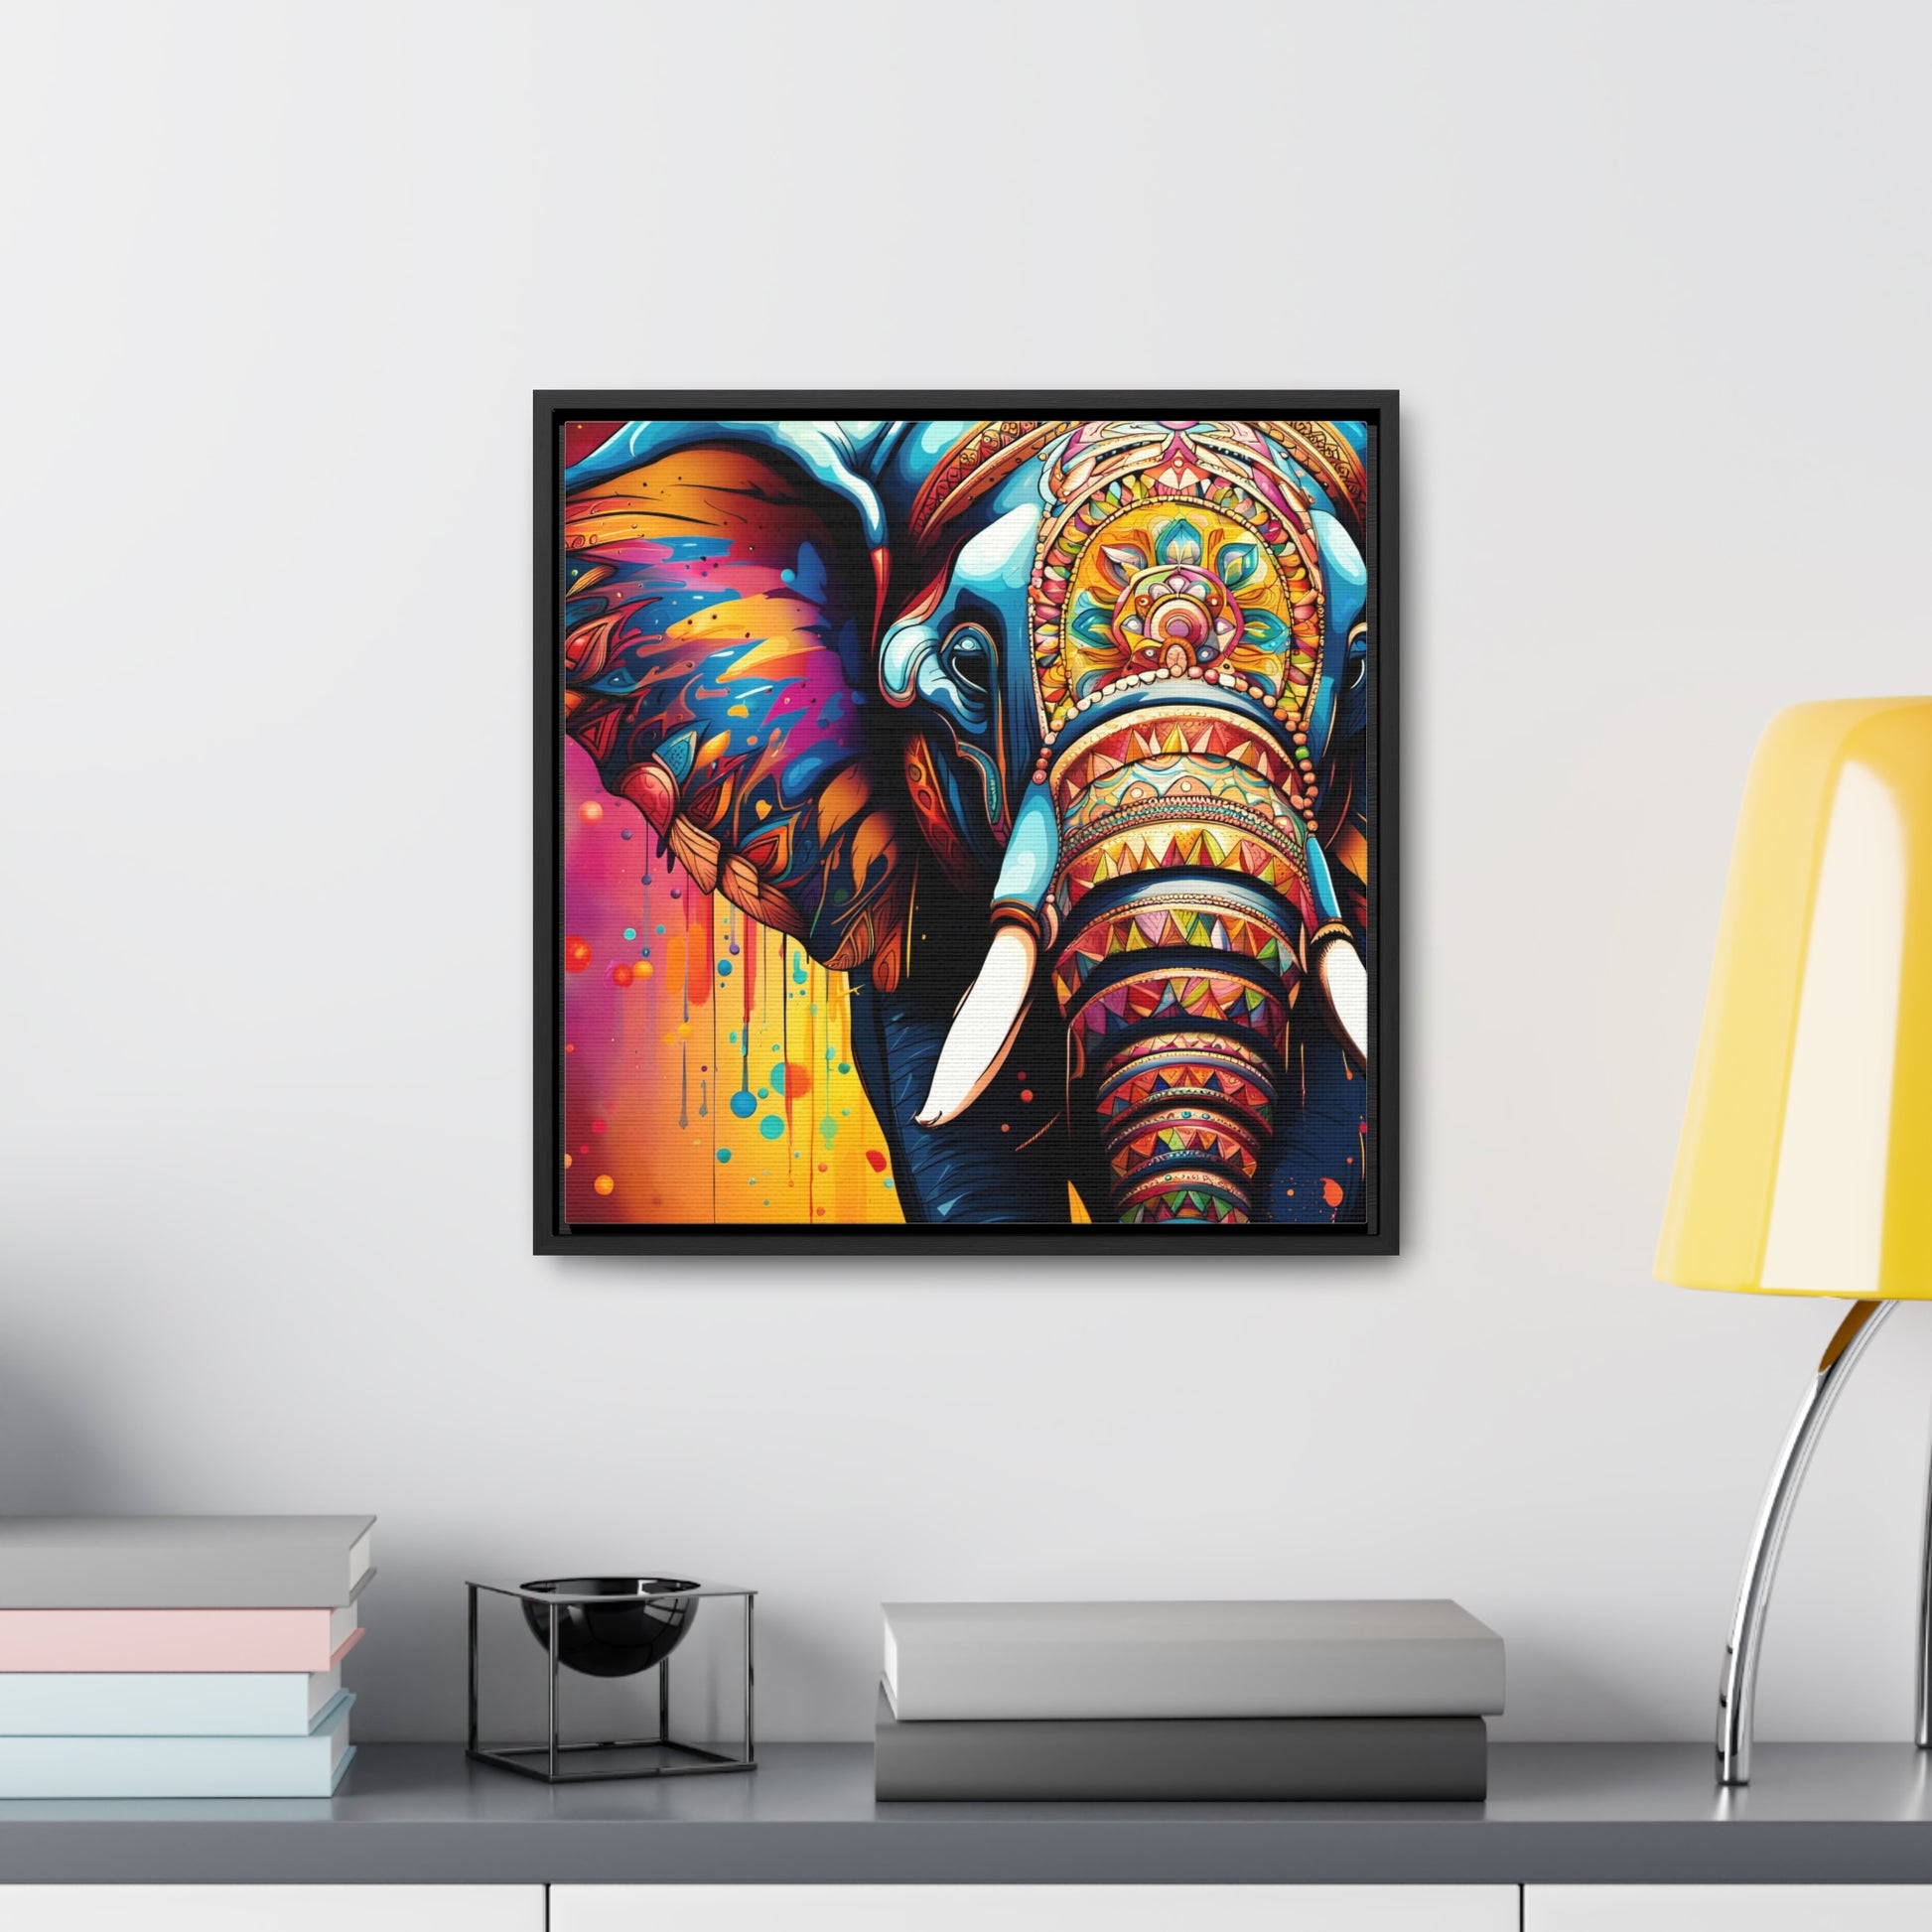 Stunning Multicolor Elephant Head Print on Canvas in a Floating Frame 16x16 hung on light wall